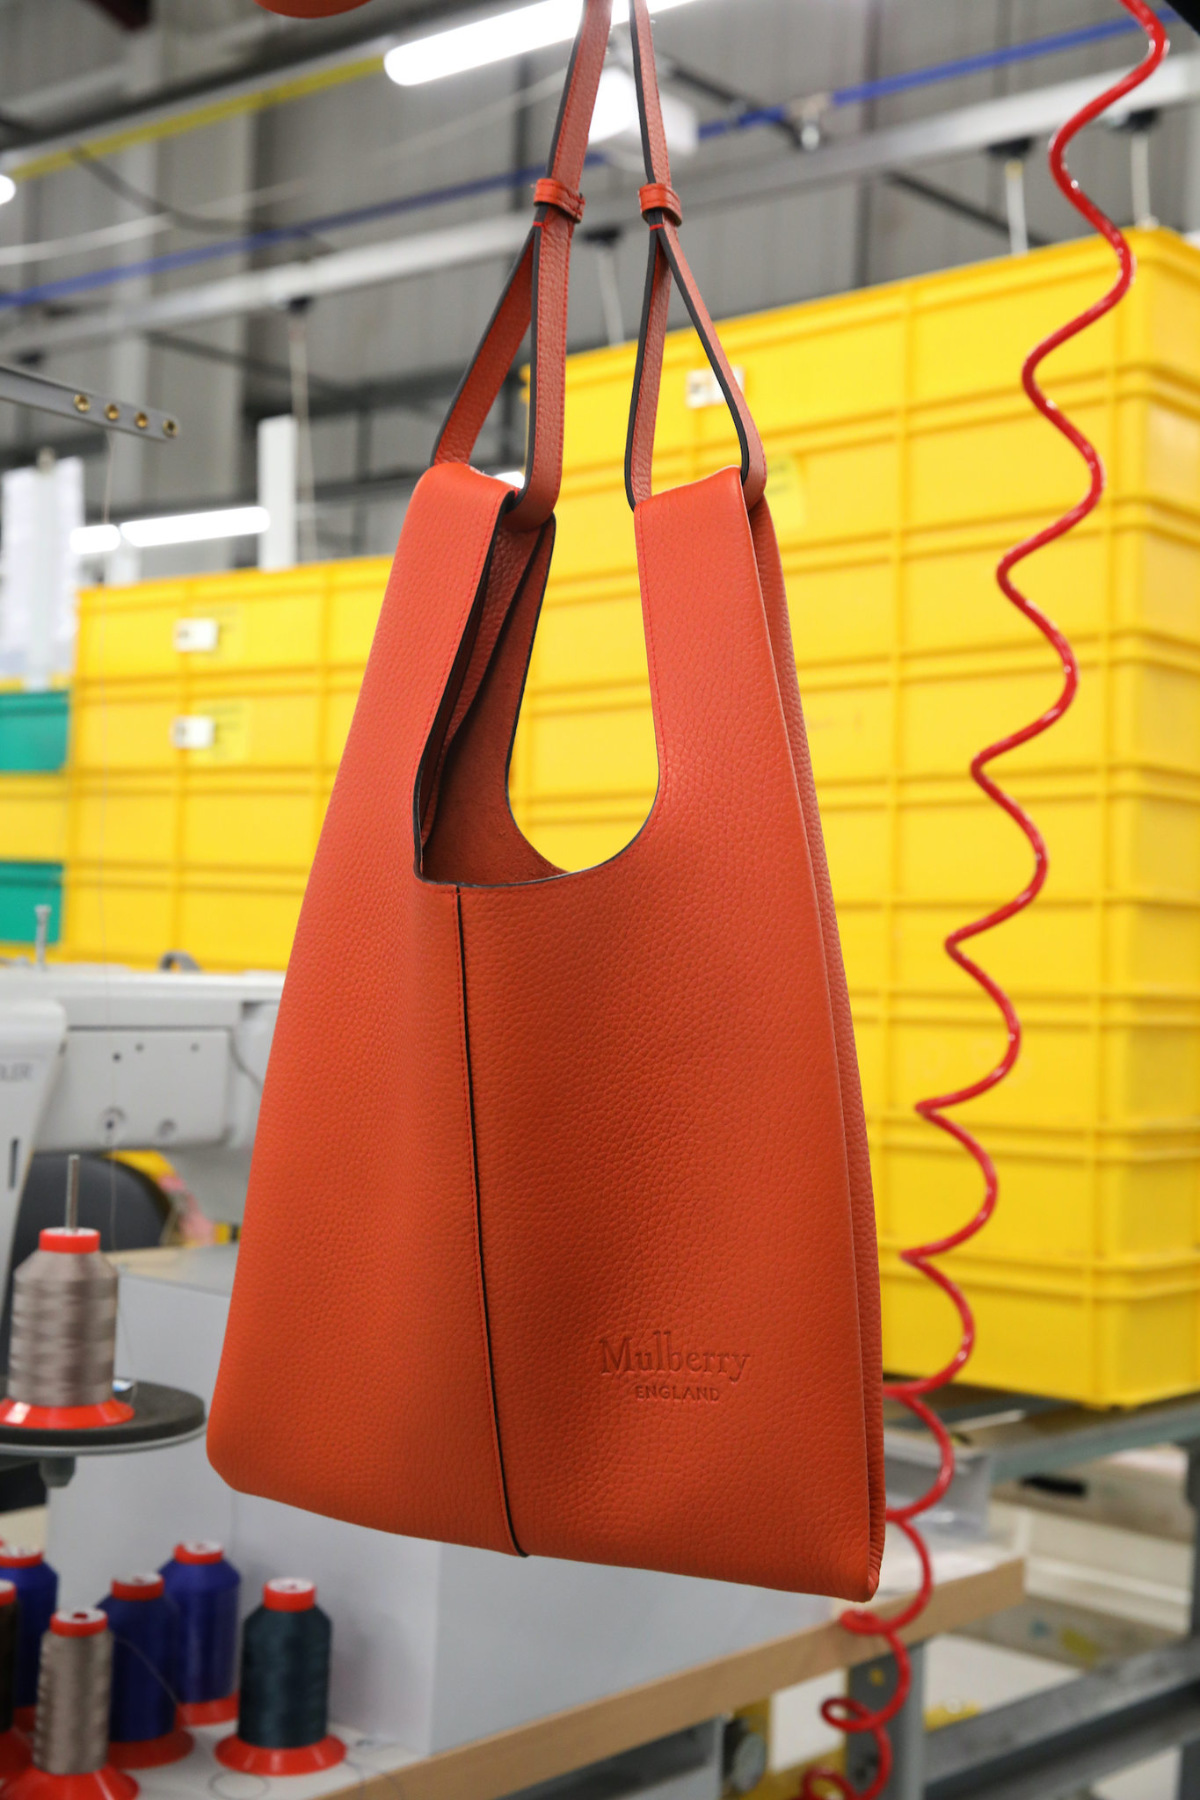 Mulberry launched first fully sustainable leather bag